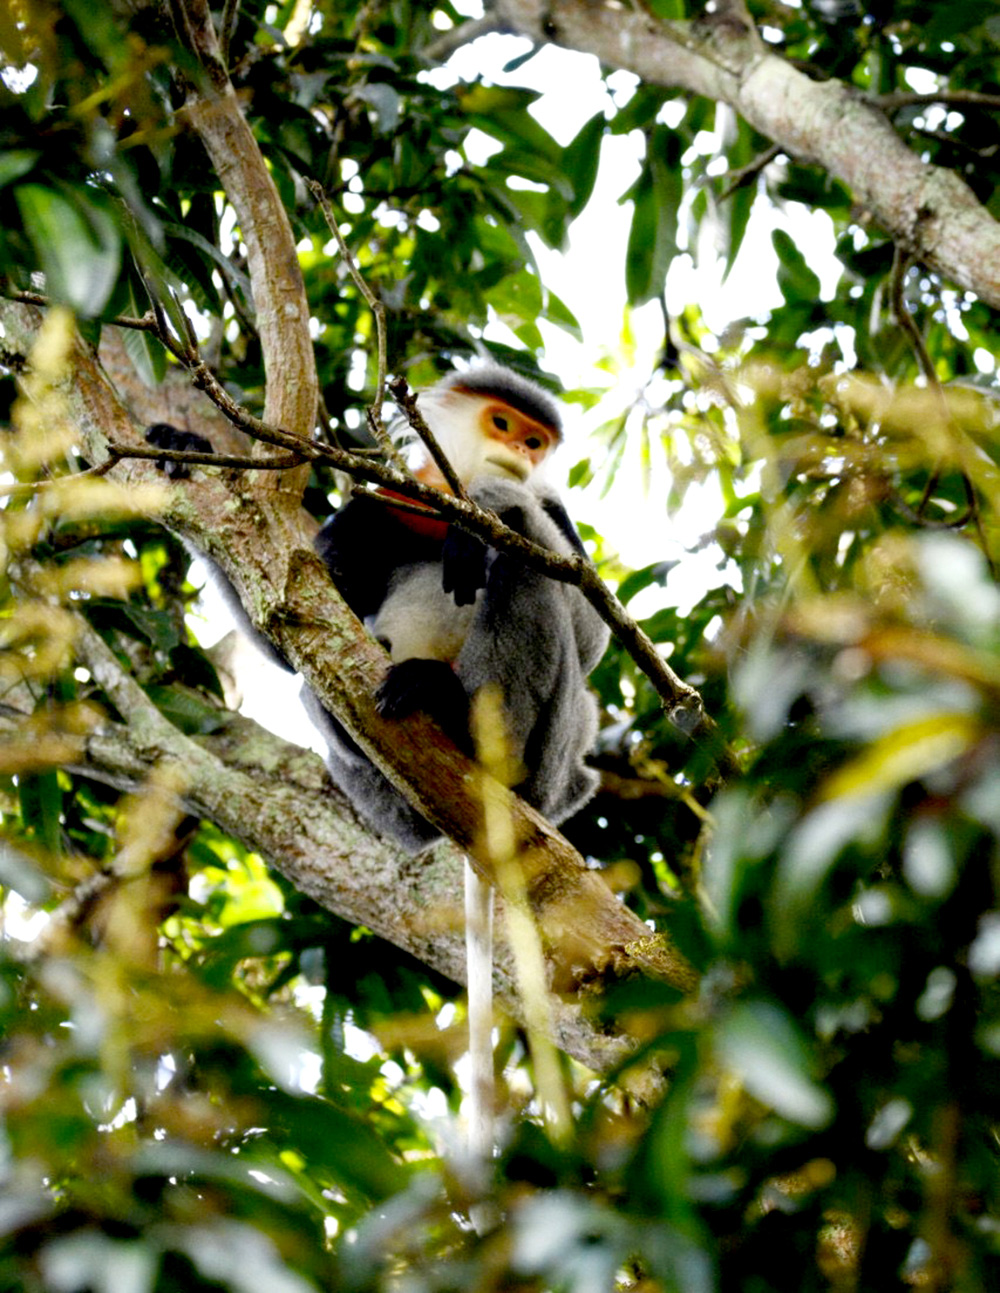 This supplied photo shows an endangered gray-shanked douc langur in Tuy Hoa City, Phu Yen Province, Vietnam. Photo: Handout via Tuoi Tre